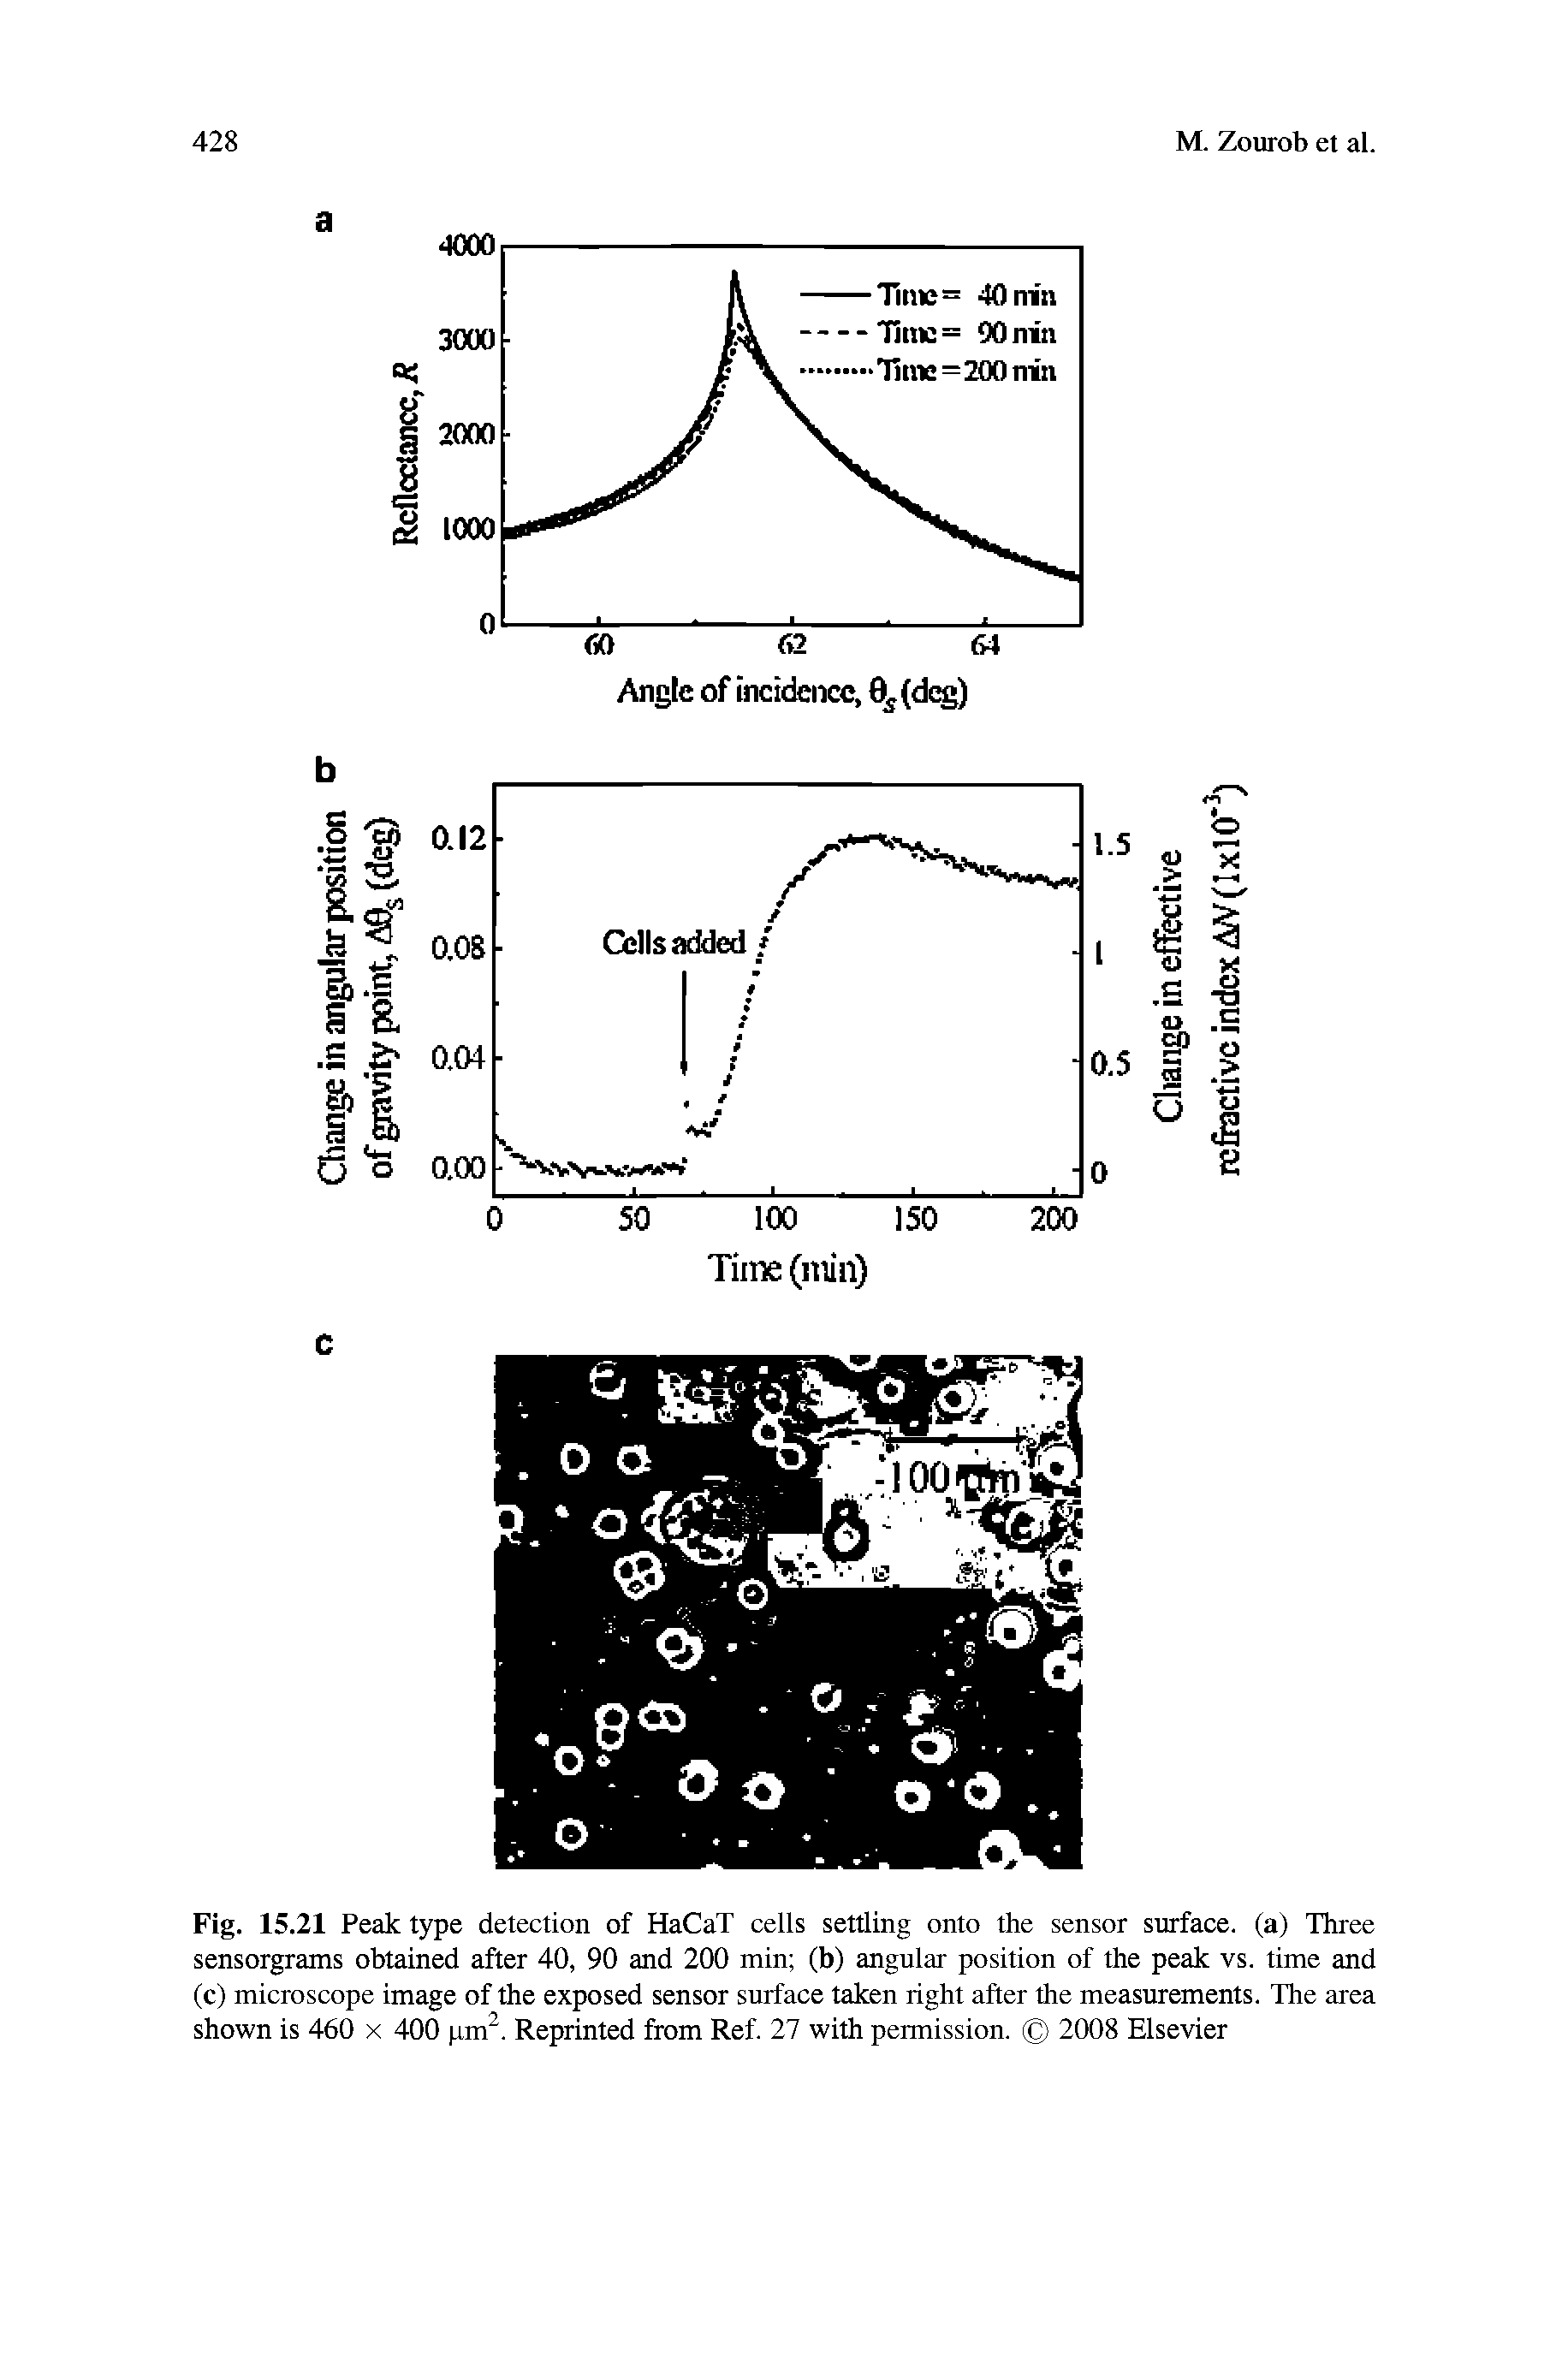 Fig. 15.21 Peak type detection of HaCaT cells settling onto the sensor surface, (a) Three sensorgrams obtained after 40, 90 and 200 min (b) angular position of the peak vs. time and (c) microscope image of the exposed sensor surface taken right after the measurements. The area shown is 460 x 400 pm2. Reprinted from Ref. 27 with permission. 2008 Elsevier...